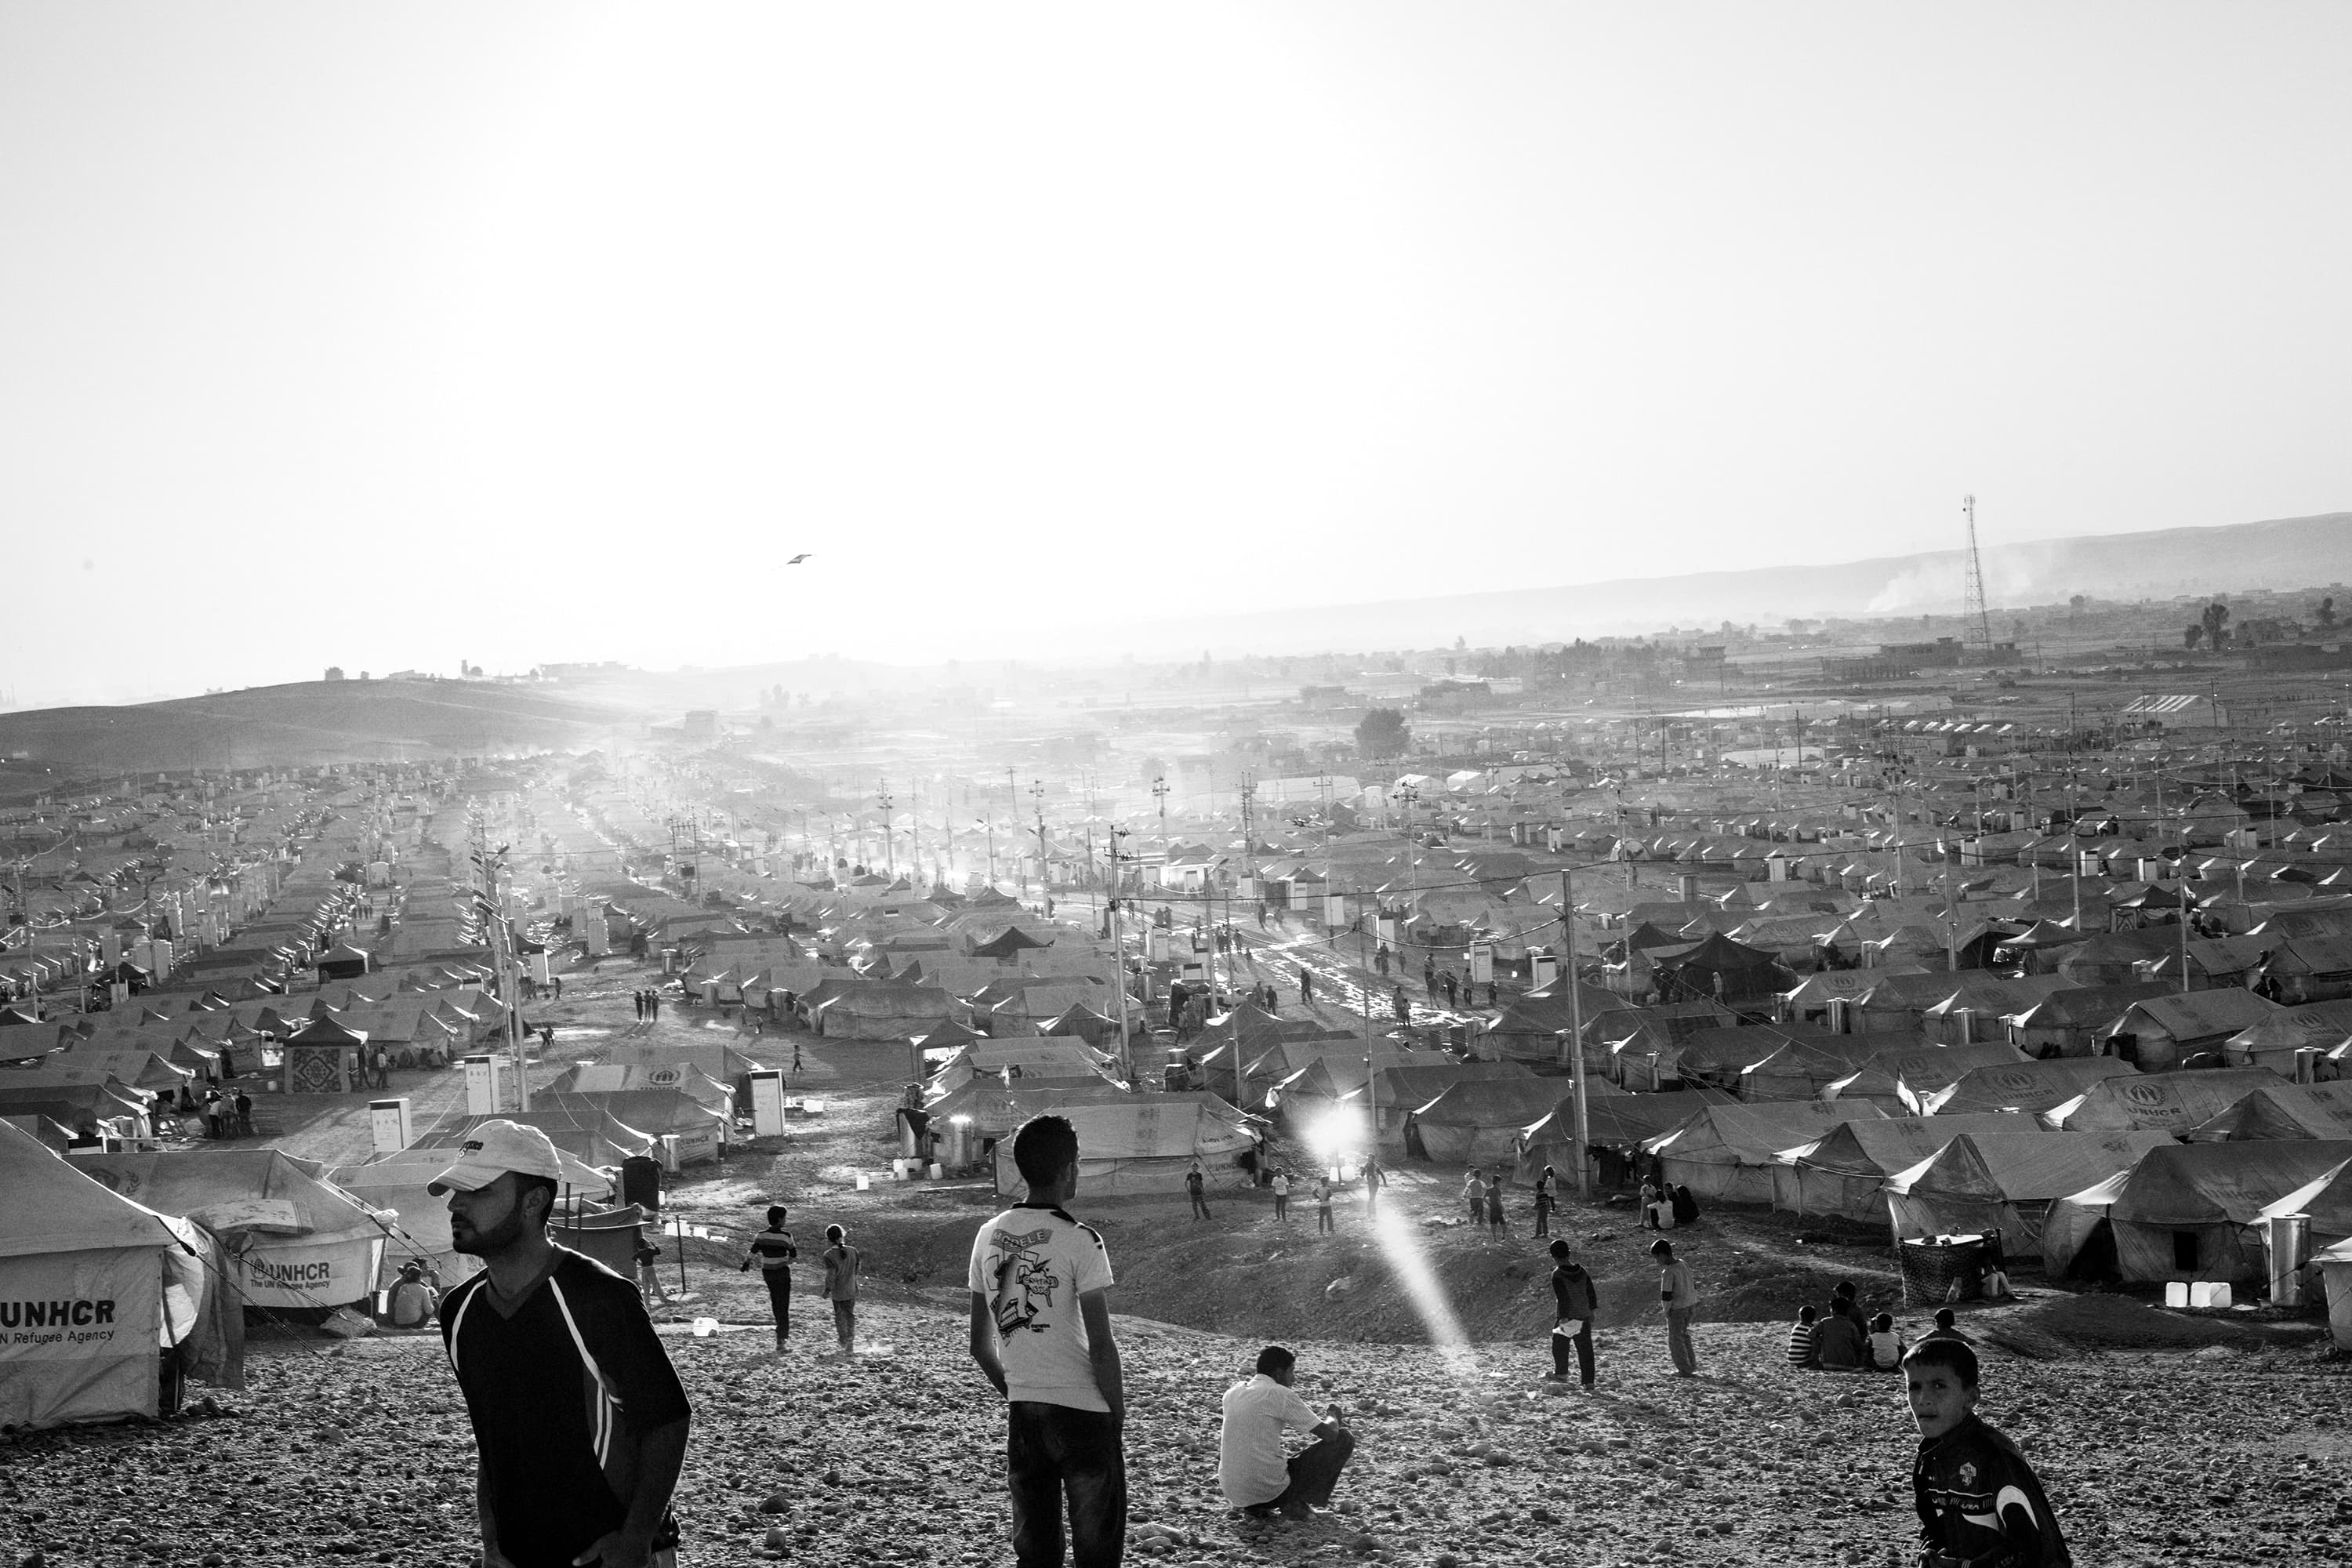 October 8, 2013 - Kawergosk refugee camp is one of the biggest camps in the Kurdish area of Northern Iraq. Tens of thousands of Kurds fled the Kurdish area in Syria (Rojava), due to clashes between radical Islamic groups and YPG (People's Protection Units).